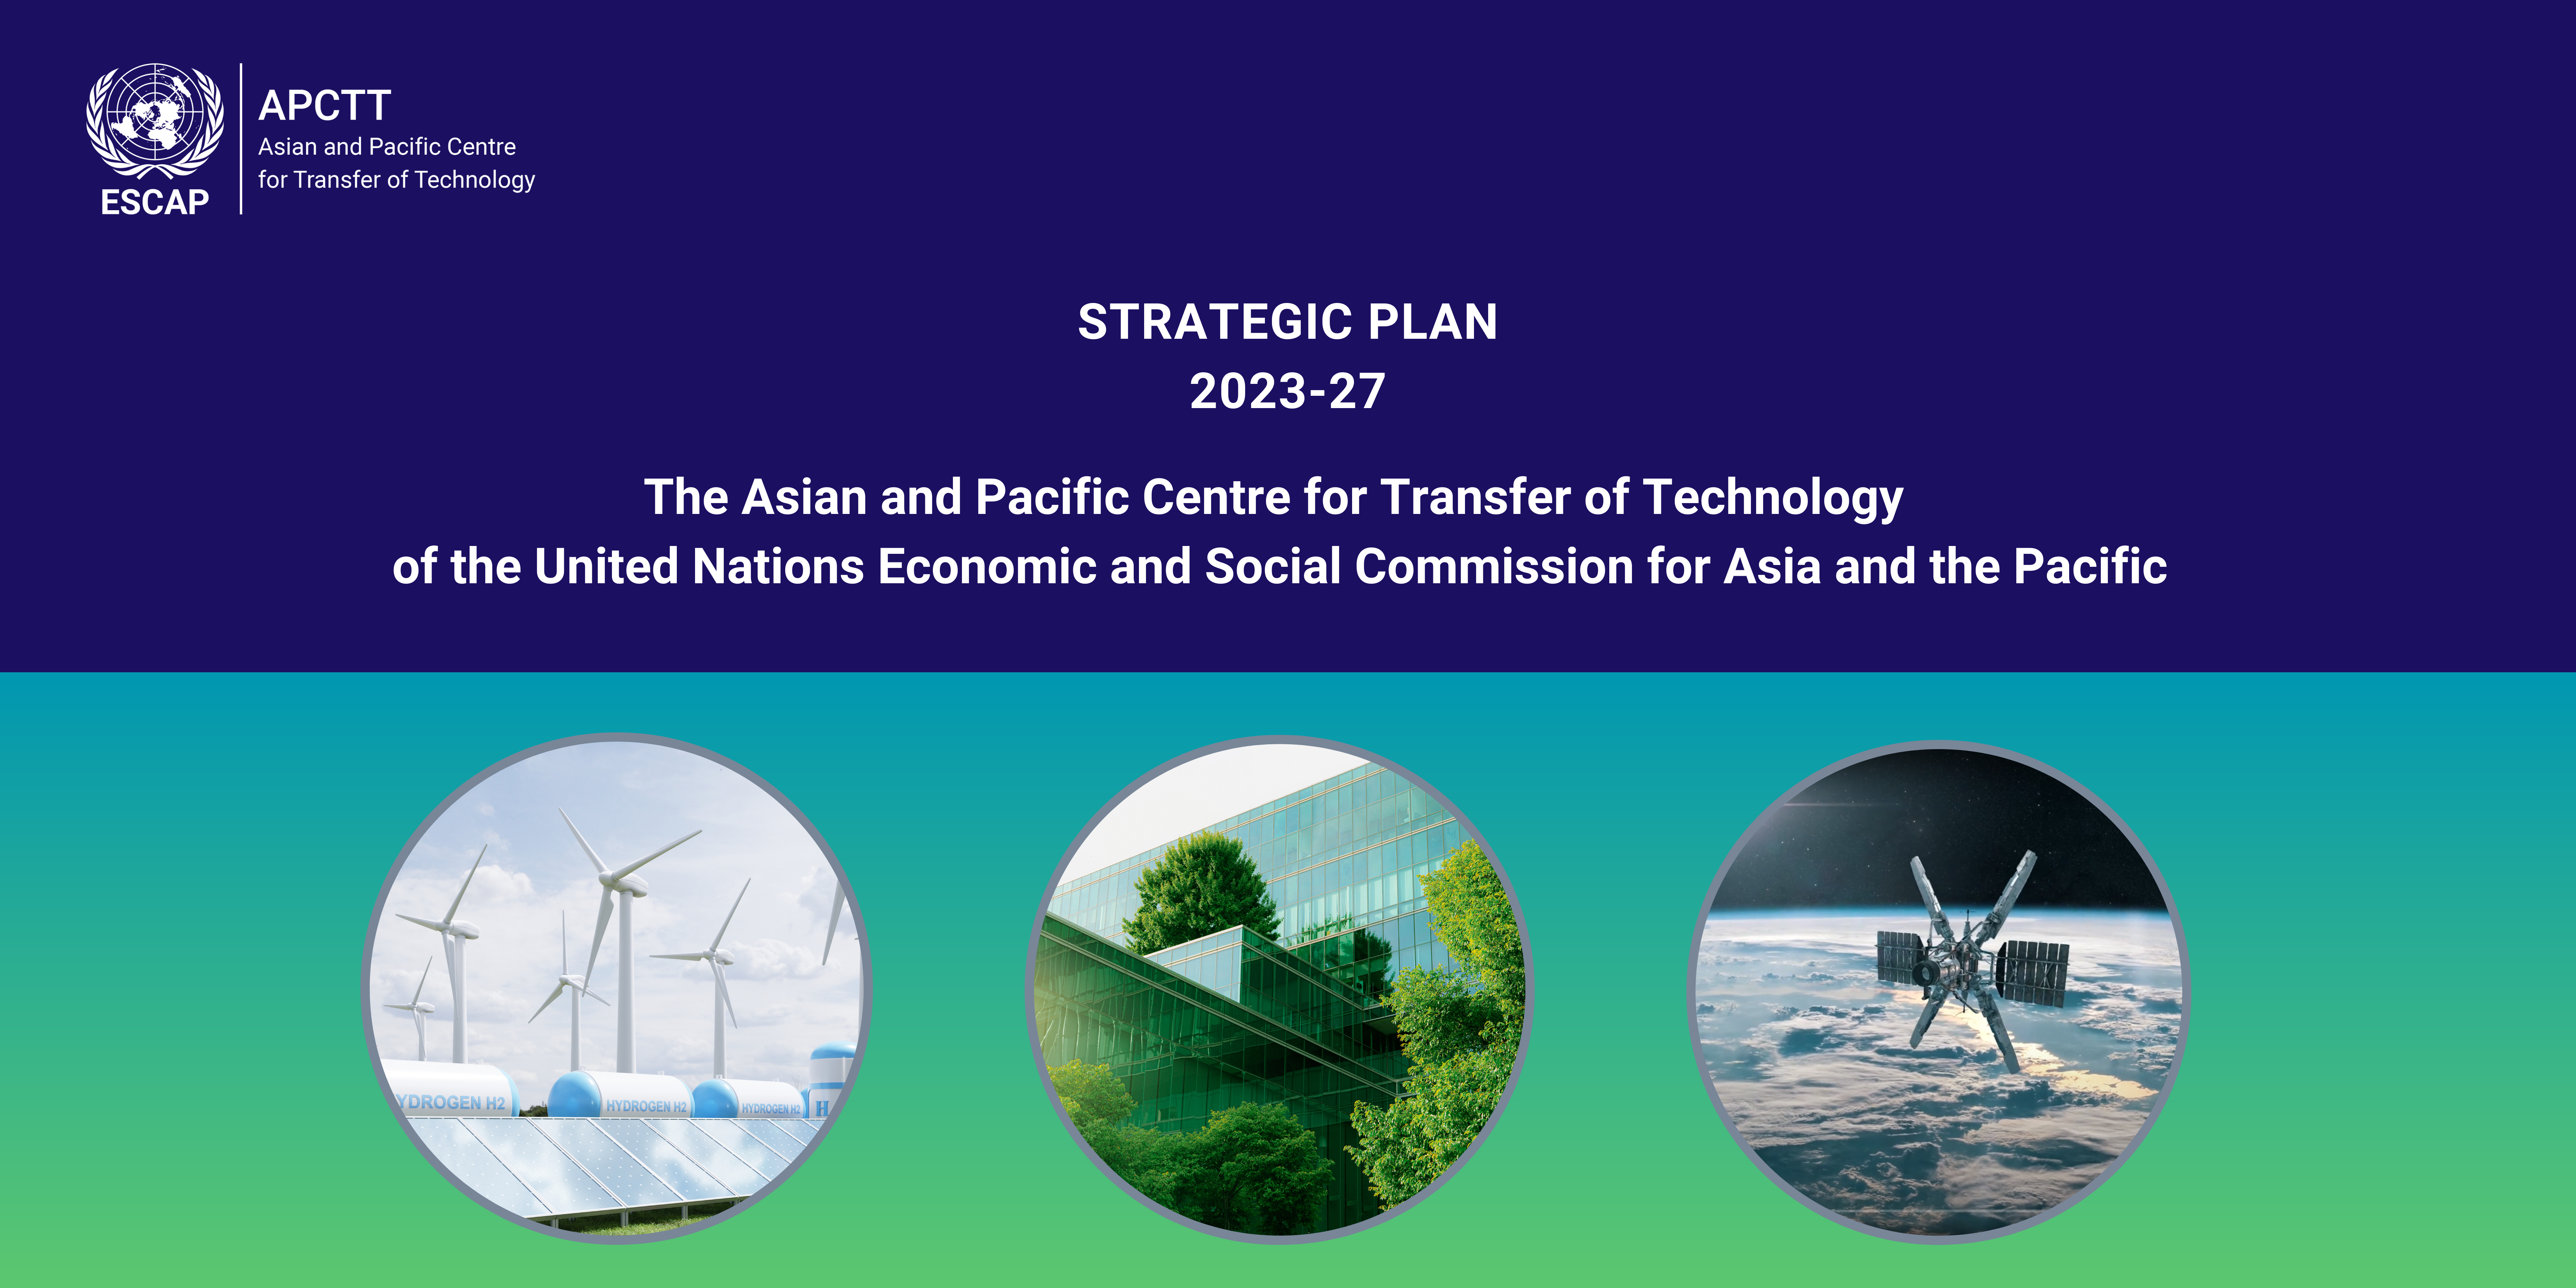 Strategic Plan for the Asian and Pacific Centre for Transfer of Technology (APCTT)